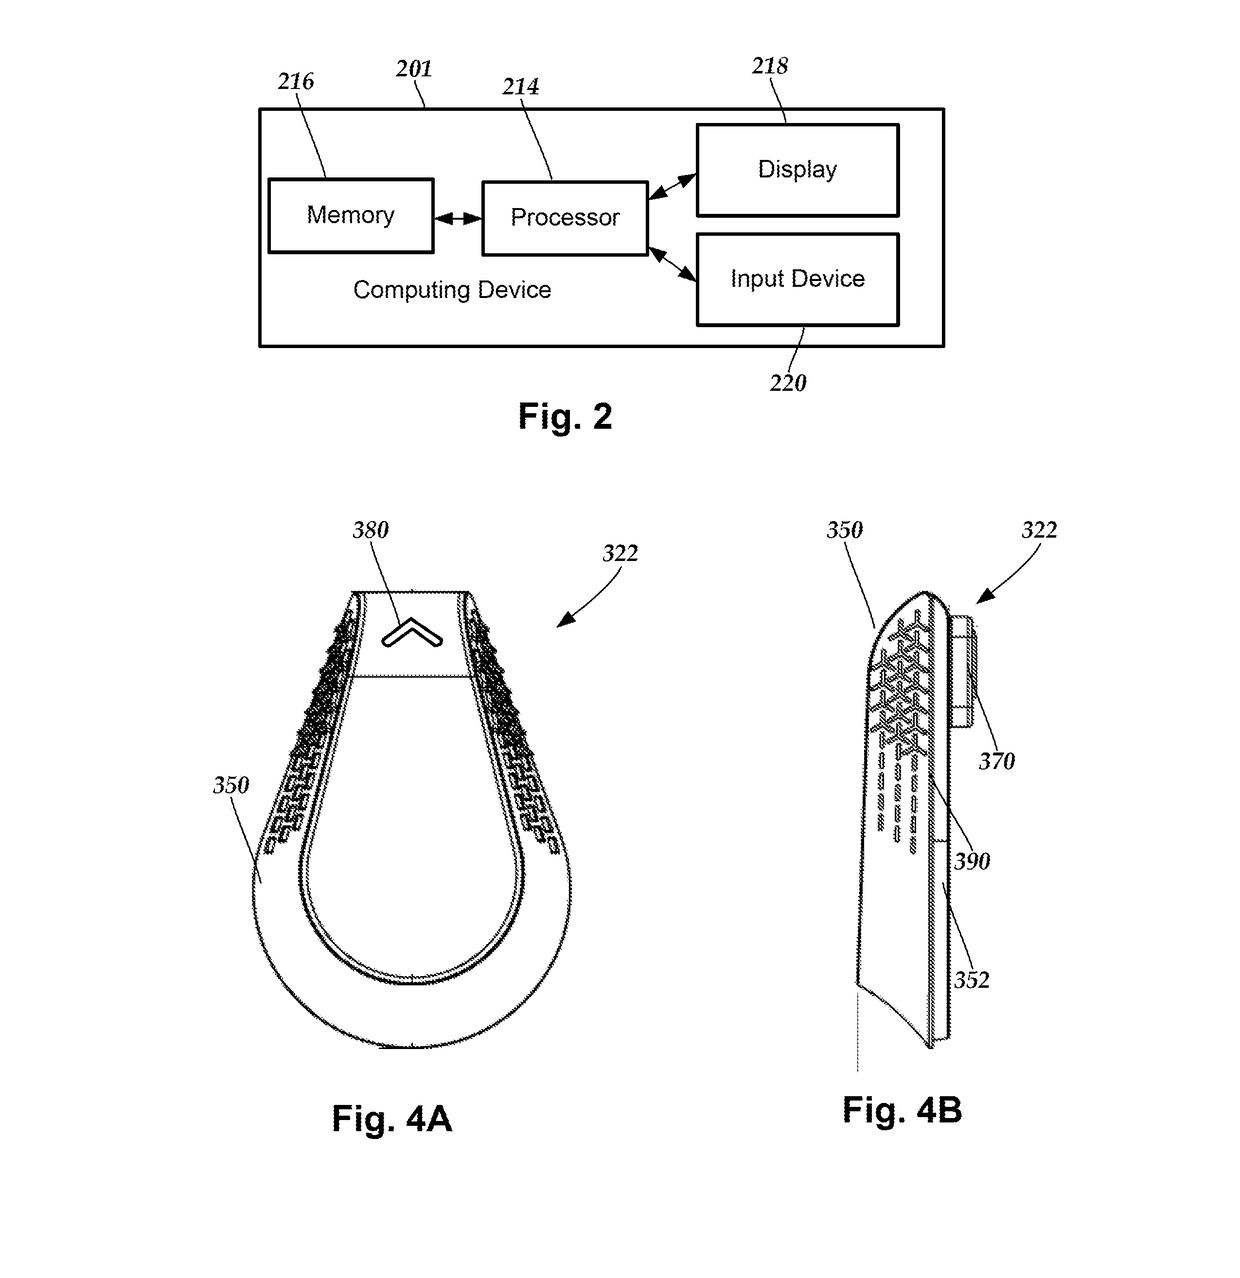 System and methods with user interfaces for monitoring physical therapy and rehabilitation